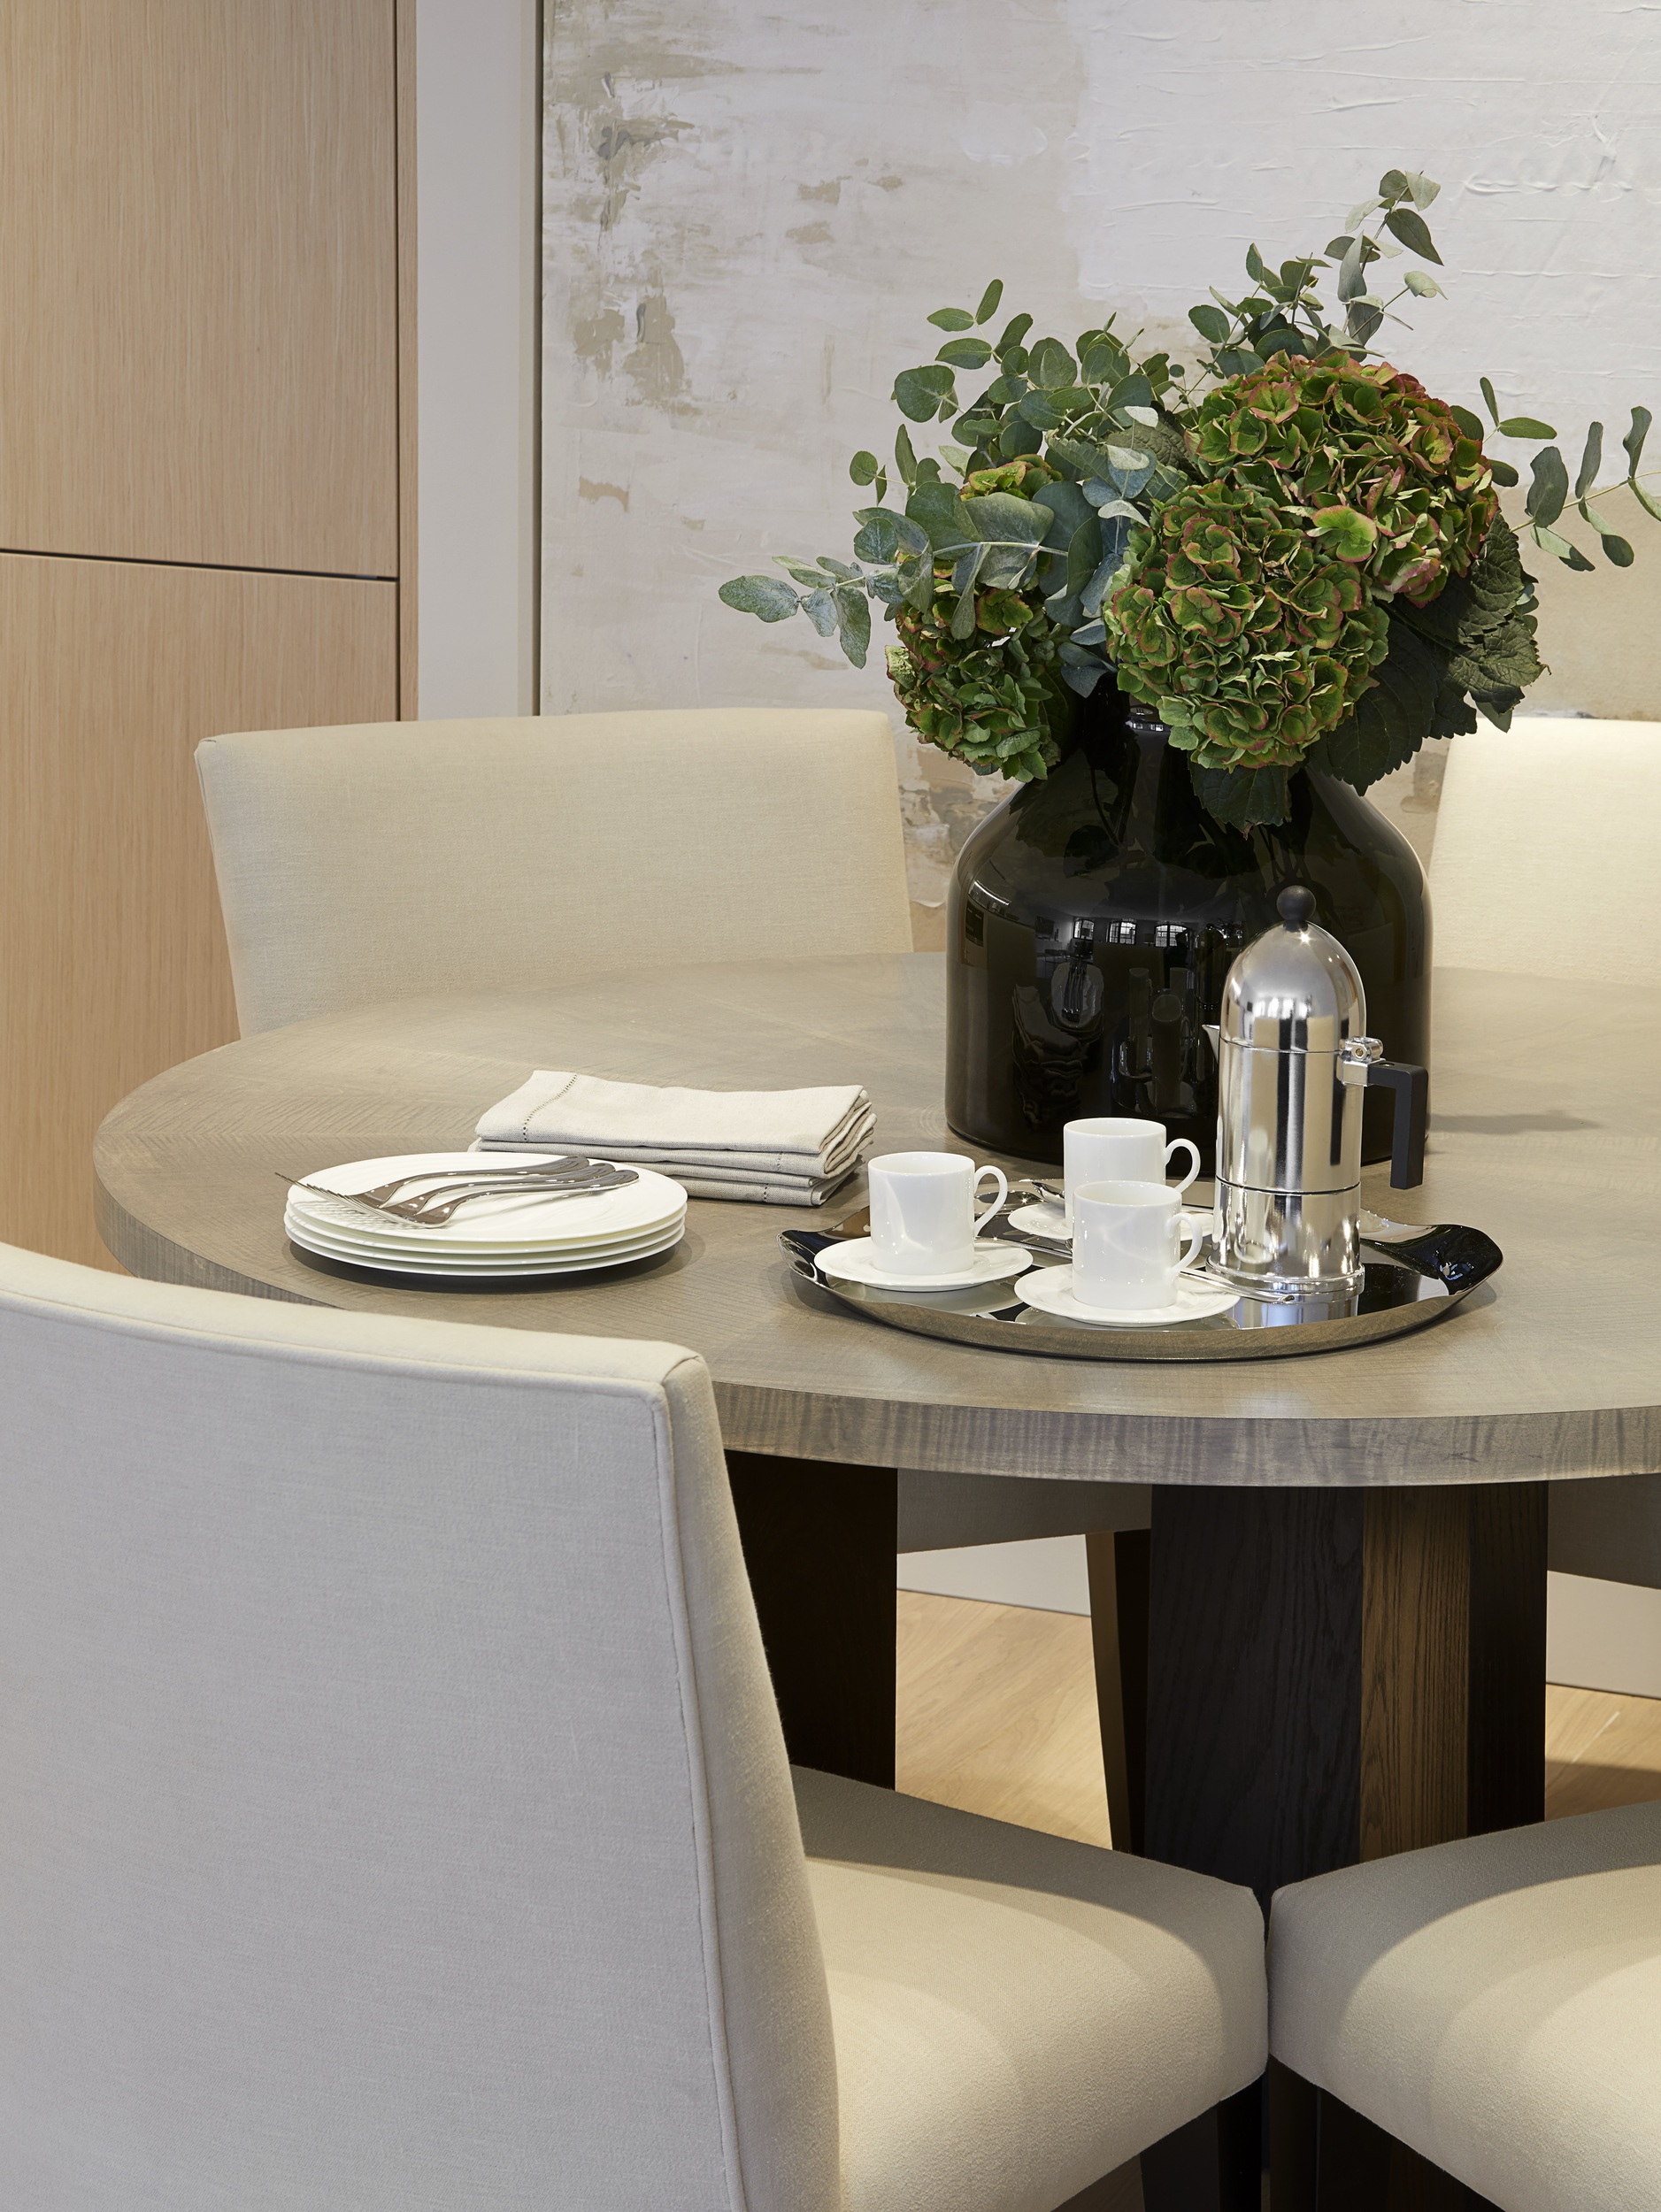 Dining table with plant